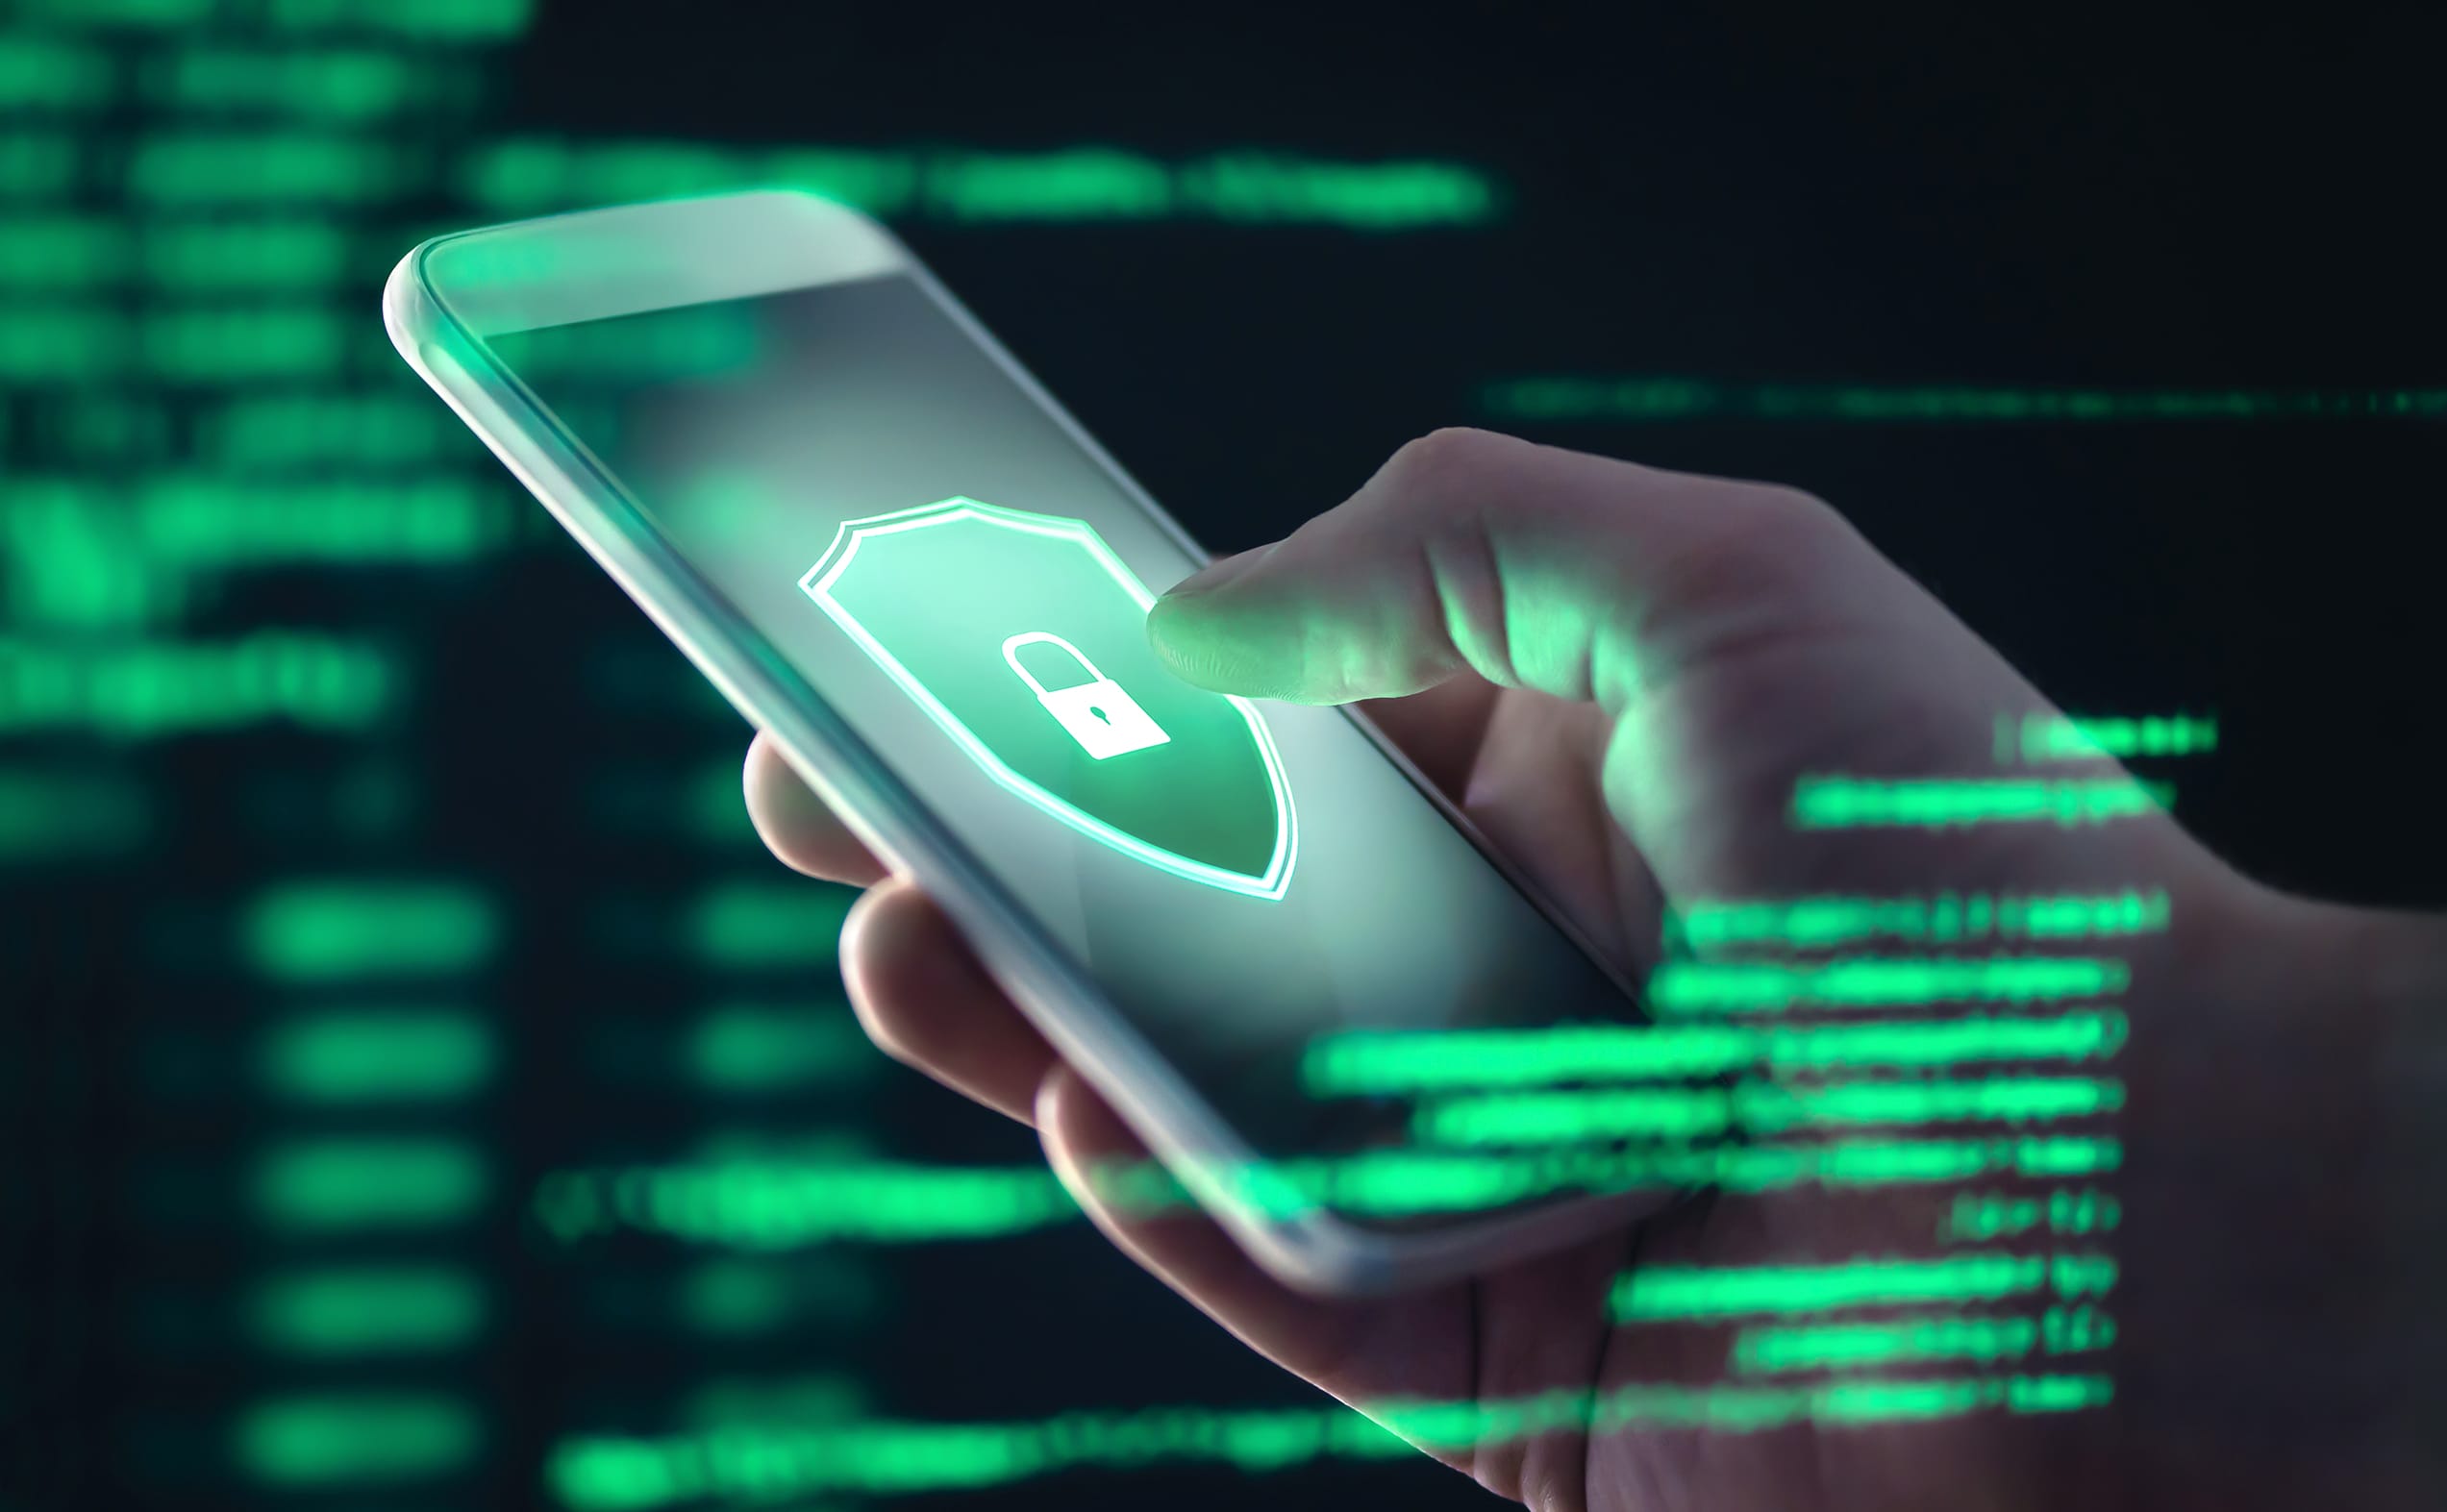 App Development Security is the most wanted cybersecurity skill in 2021